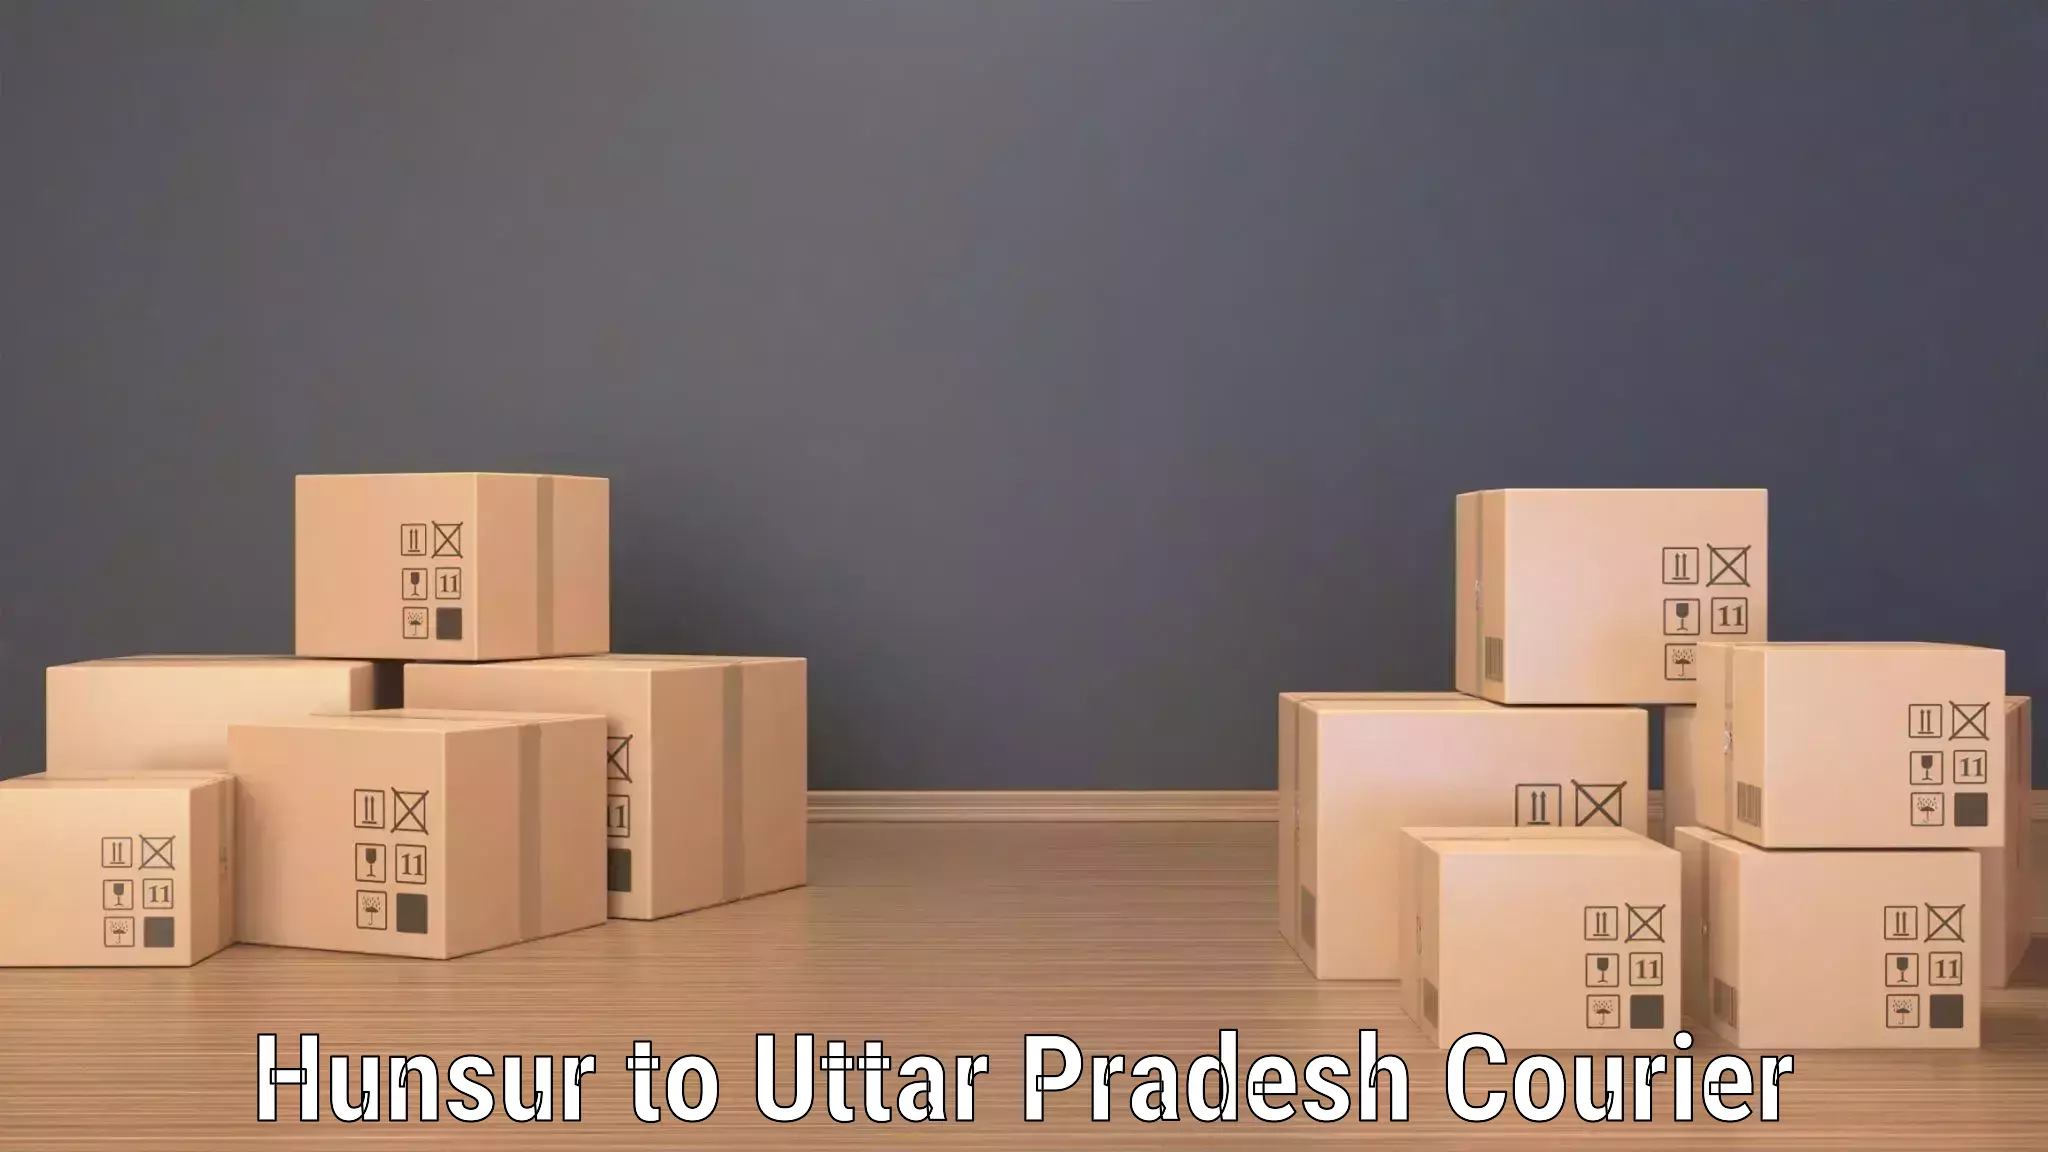 Courier service booking in Hunsur to Lucknow